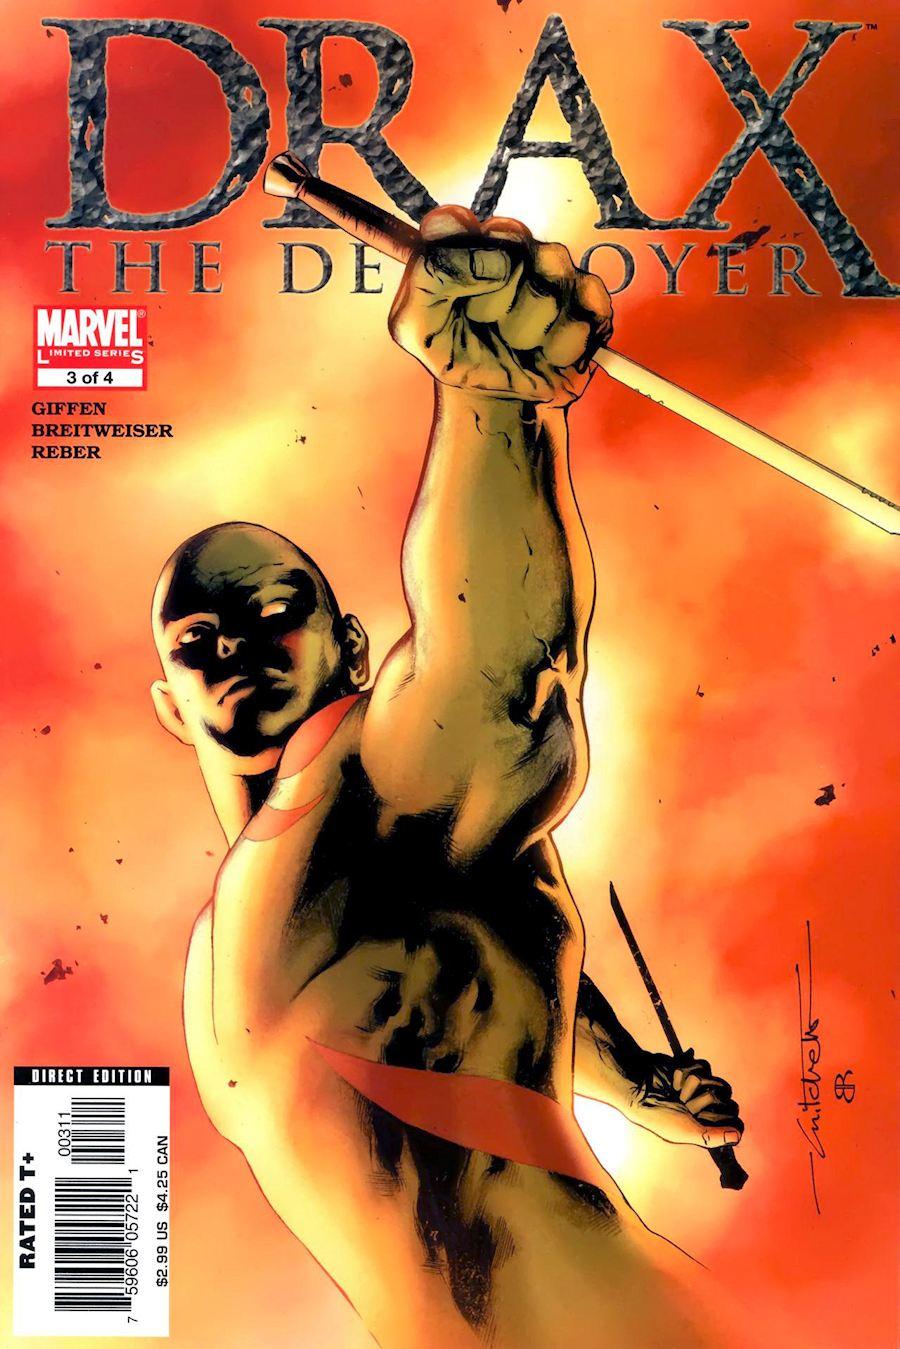 Drax the Destroyer Vol. 1 #3